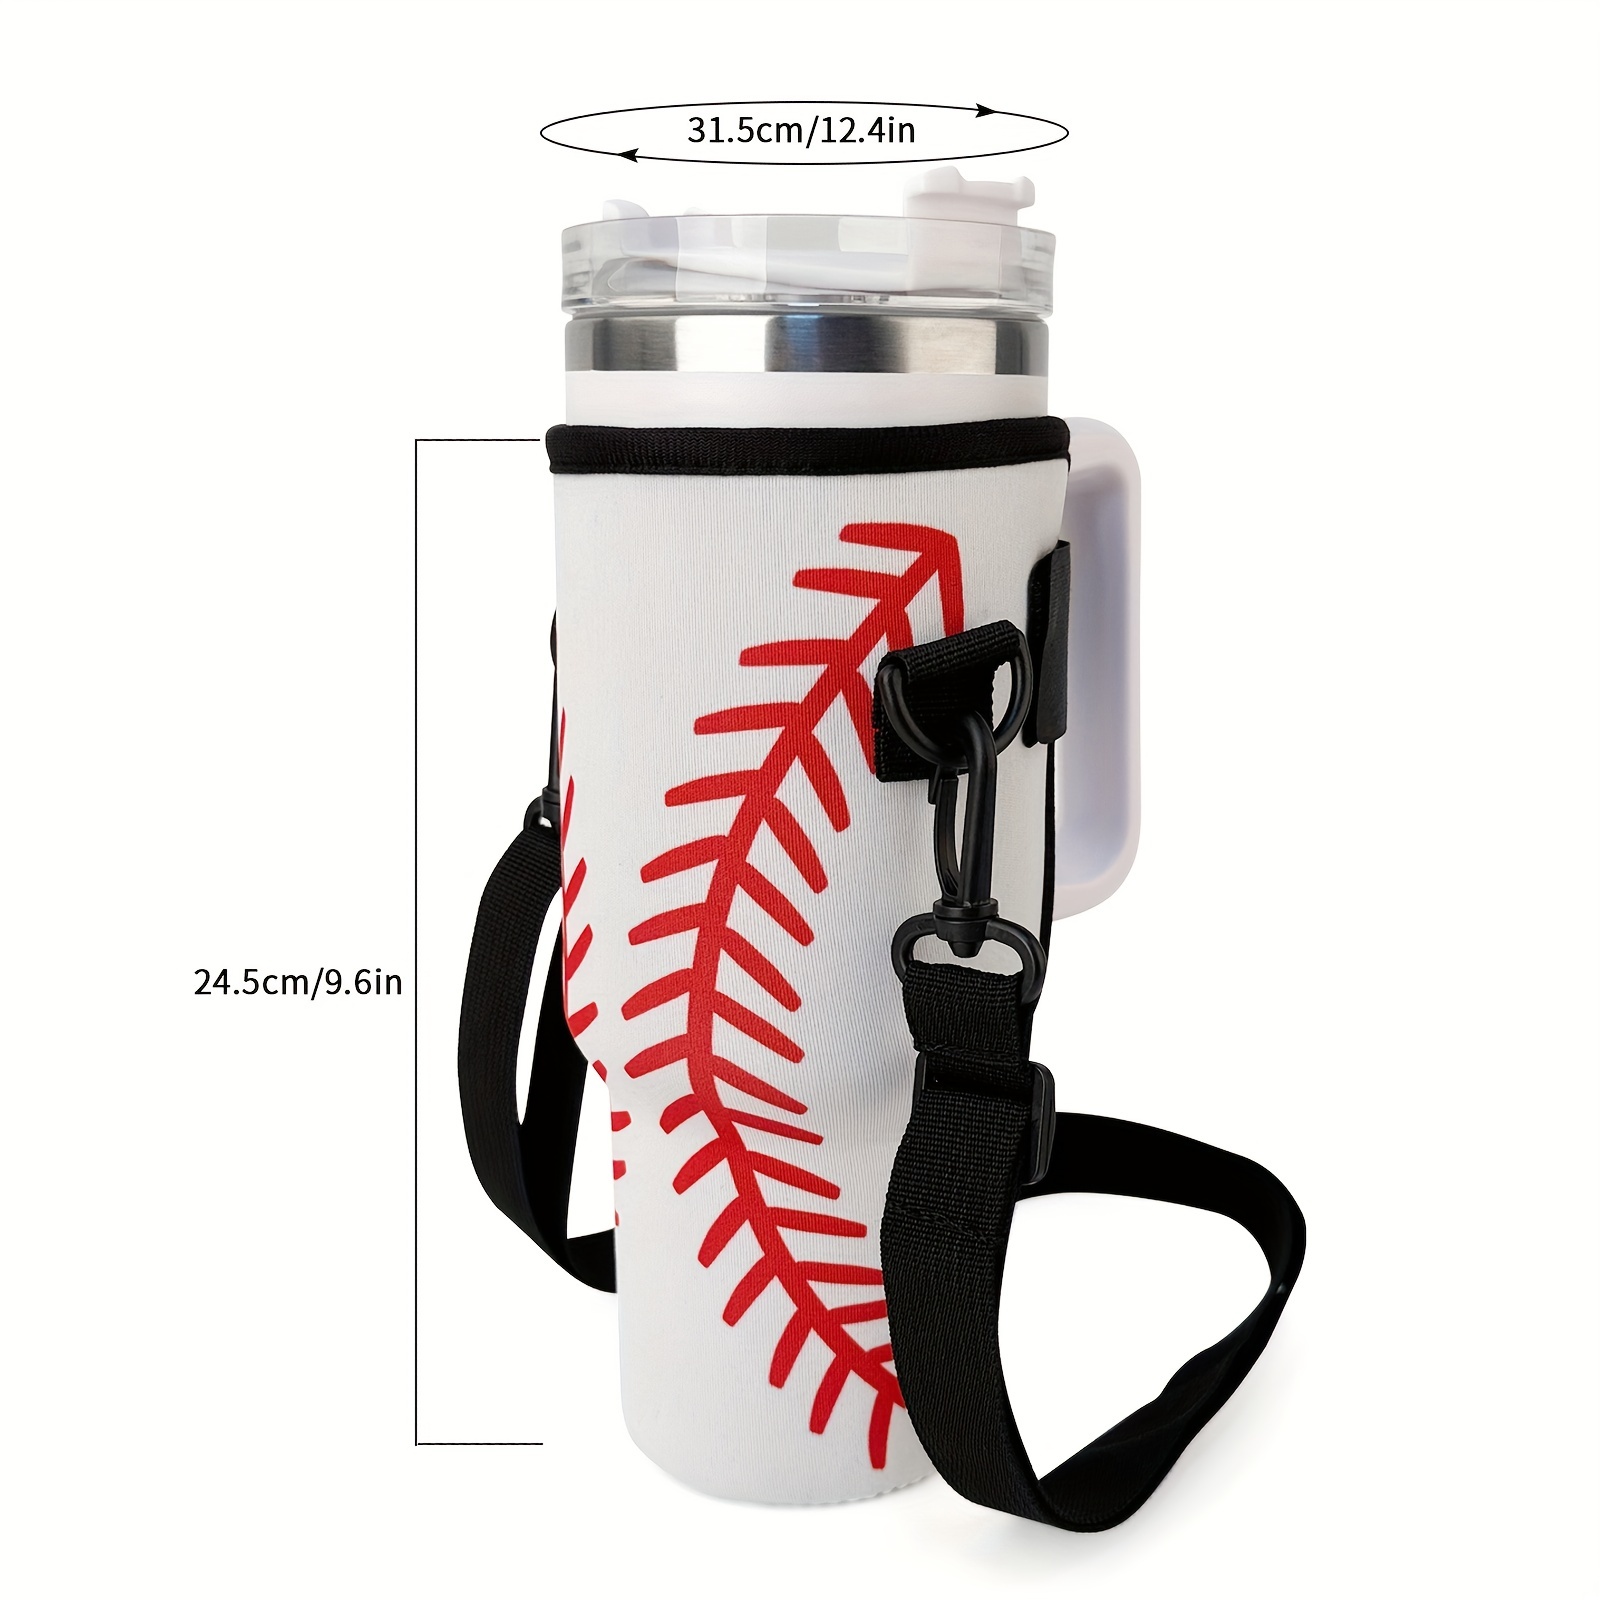 Silicone Protective Sleeve For Water Bottle 30oz/40oz Tumbler Boot Cover  With Bumper Guard, Non Slip Grip & Impact Resistance, Ideal For Outdoors,  Sports & Travel From Esw_house, $1.23